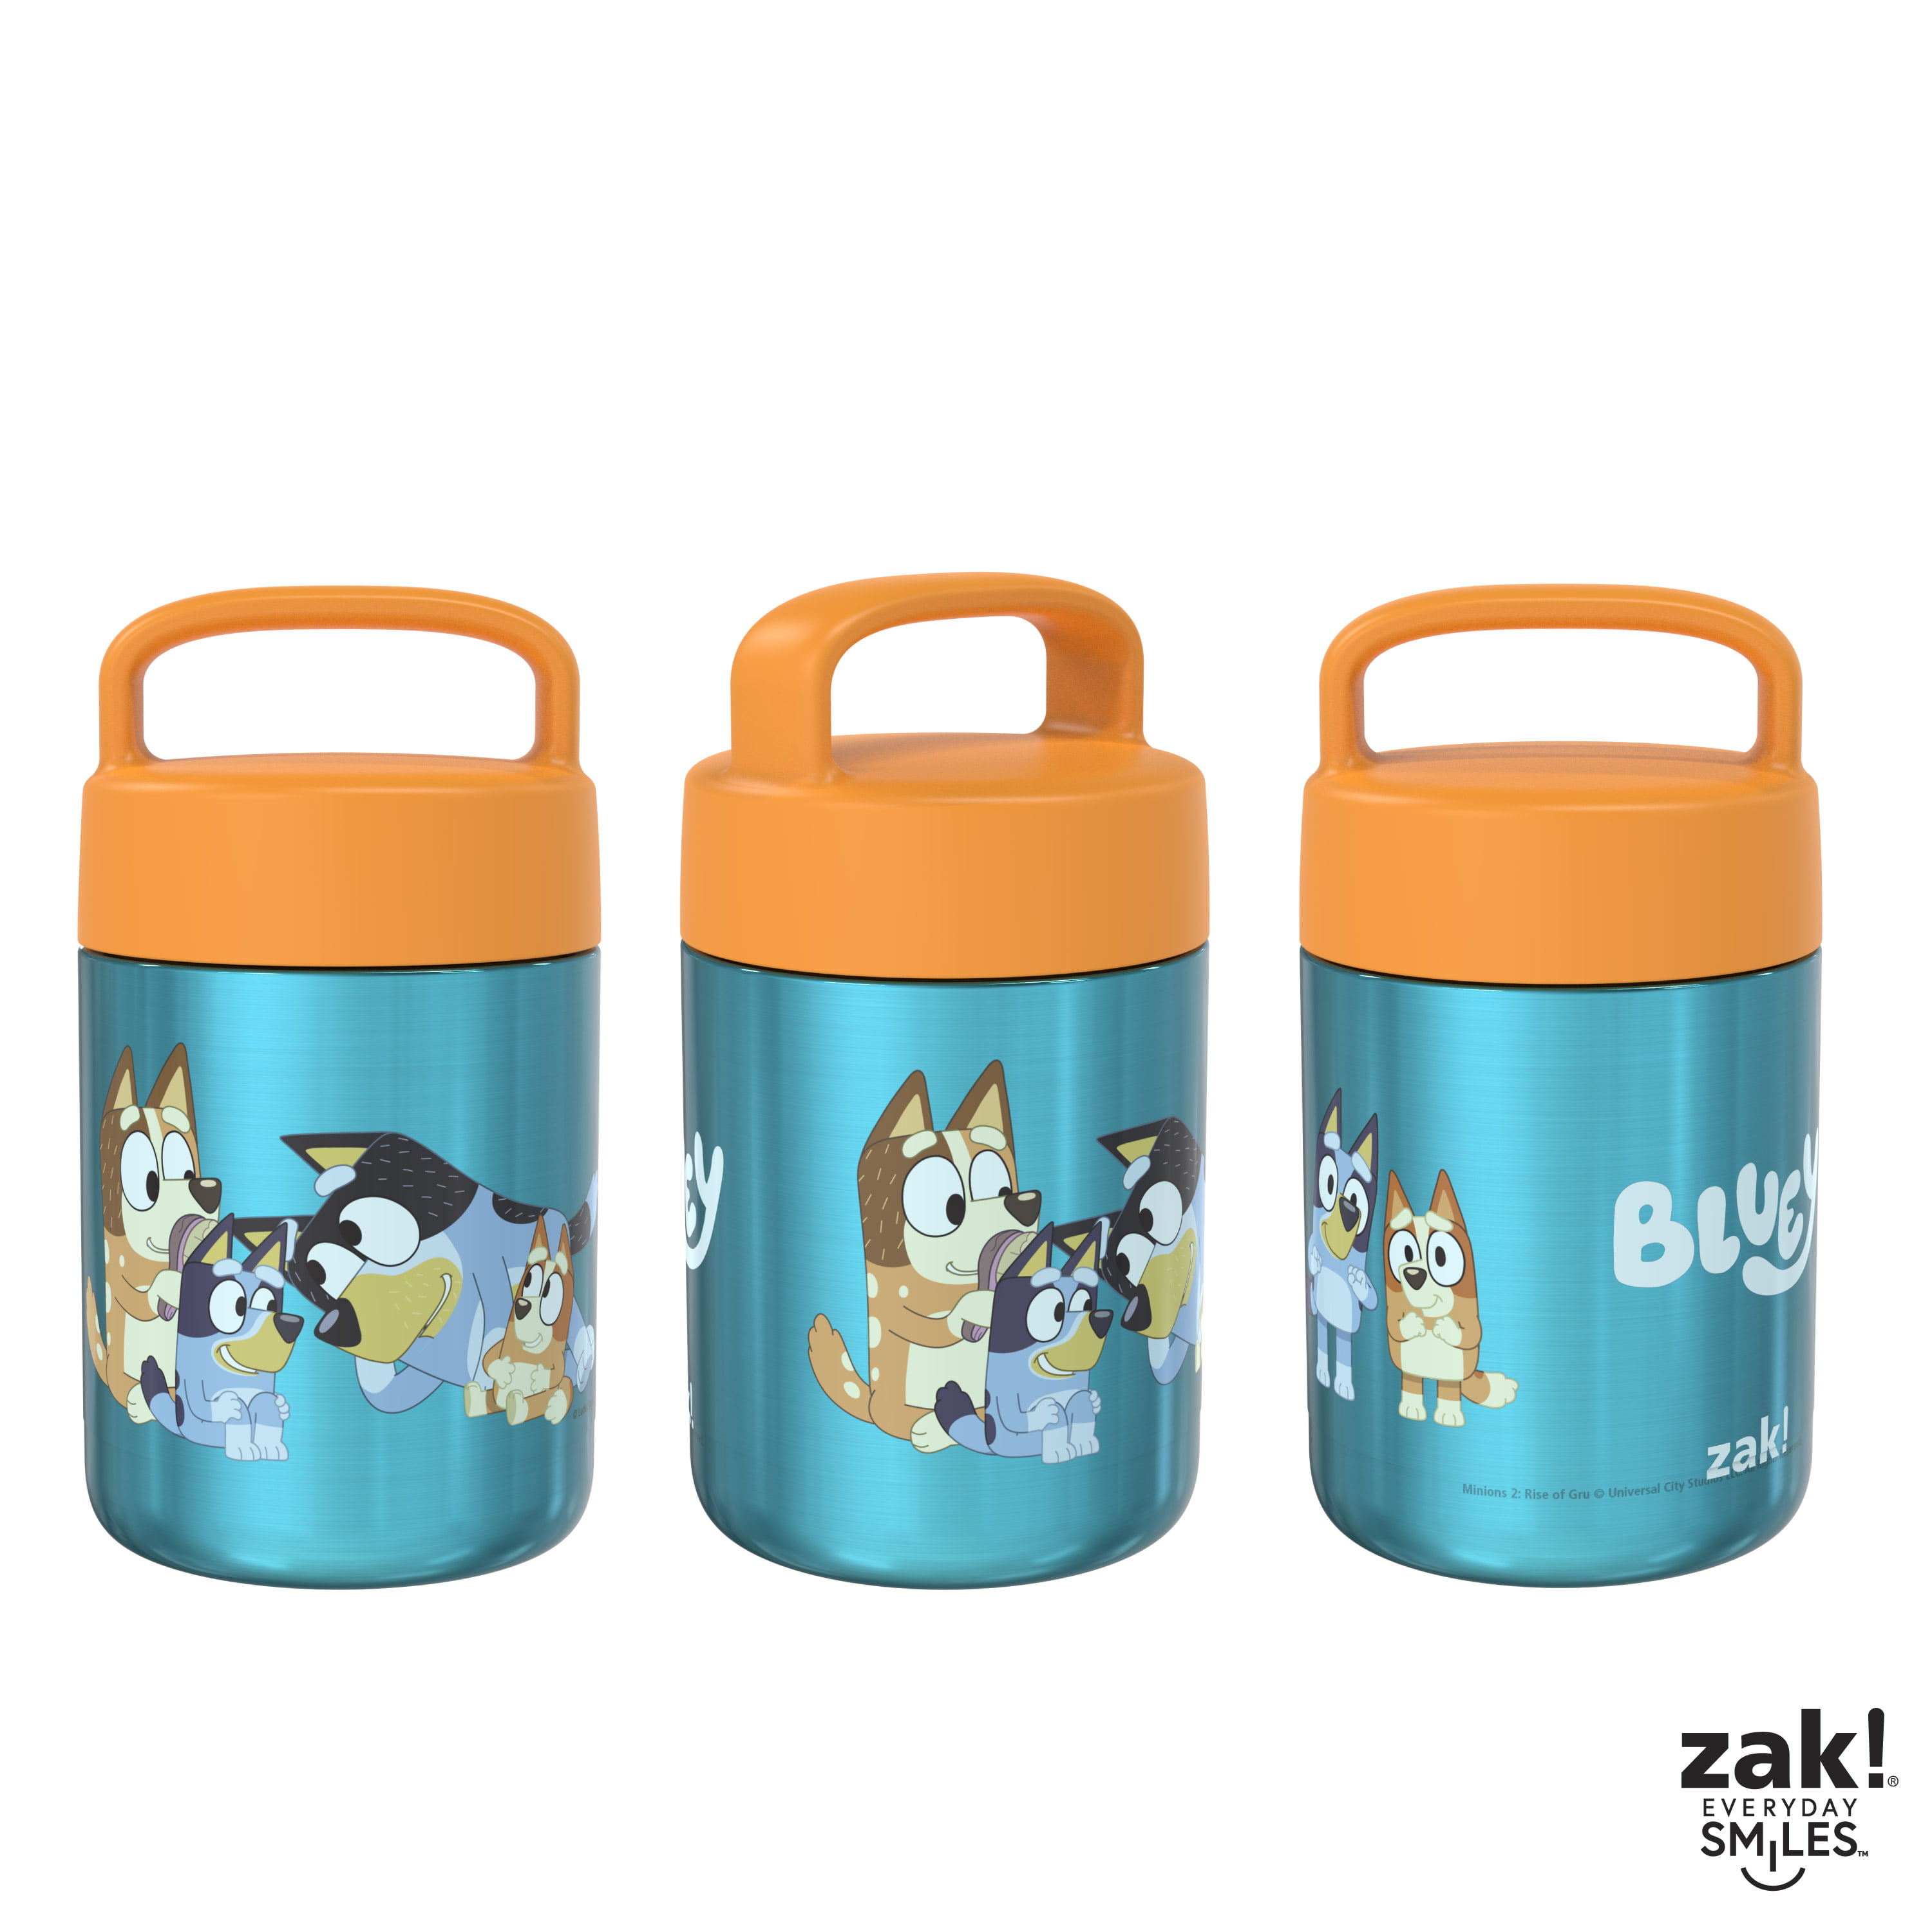  Zak Designs Kids' Vacuum Insulated Stainless Steel Food Jar  with Carry Handle, Thermal Container for Travel Meals and Lunch On The Go,  12 oz, Lilo and Stitch: Home & Kitchen